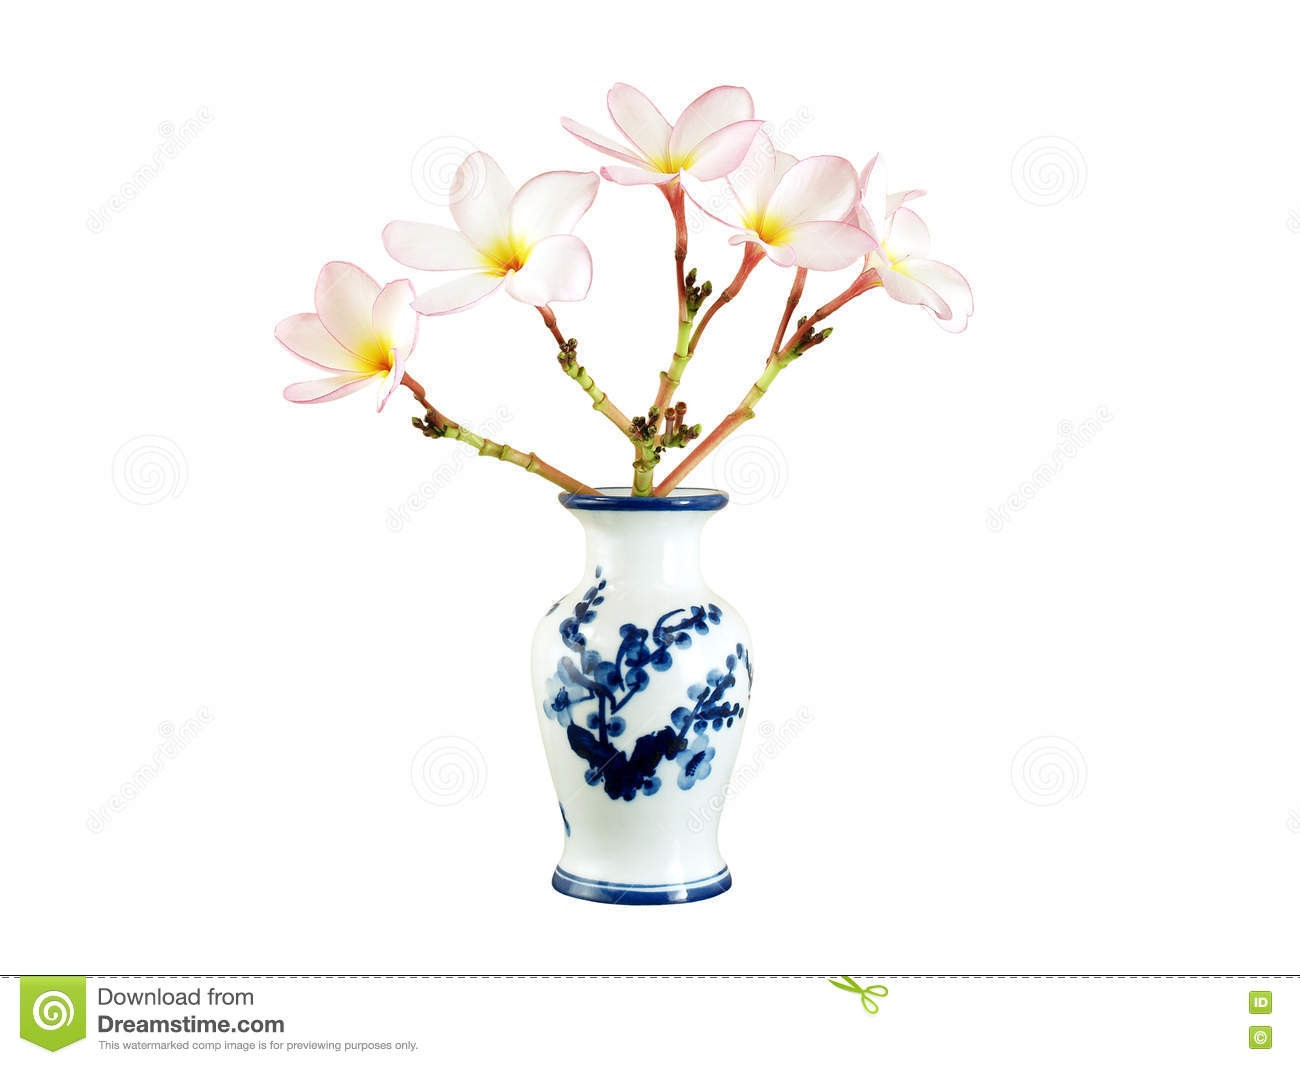 chinese plant vase of 23 awesome flower vase clipart black and white flower decoration ideas for flower vase clipart black and white best of beautiful bouquet light pink plumeria frangipani in white